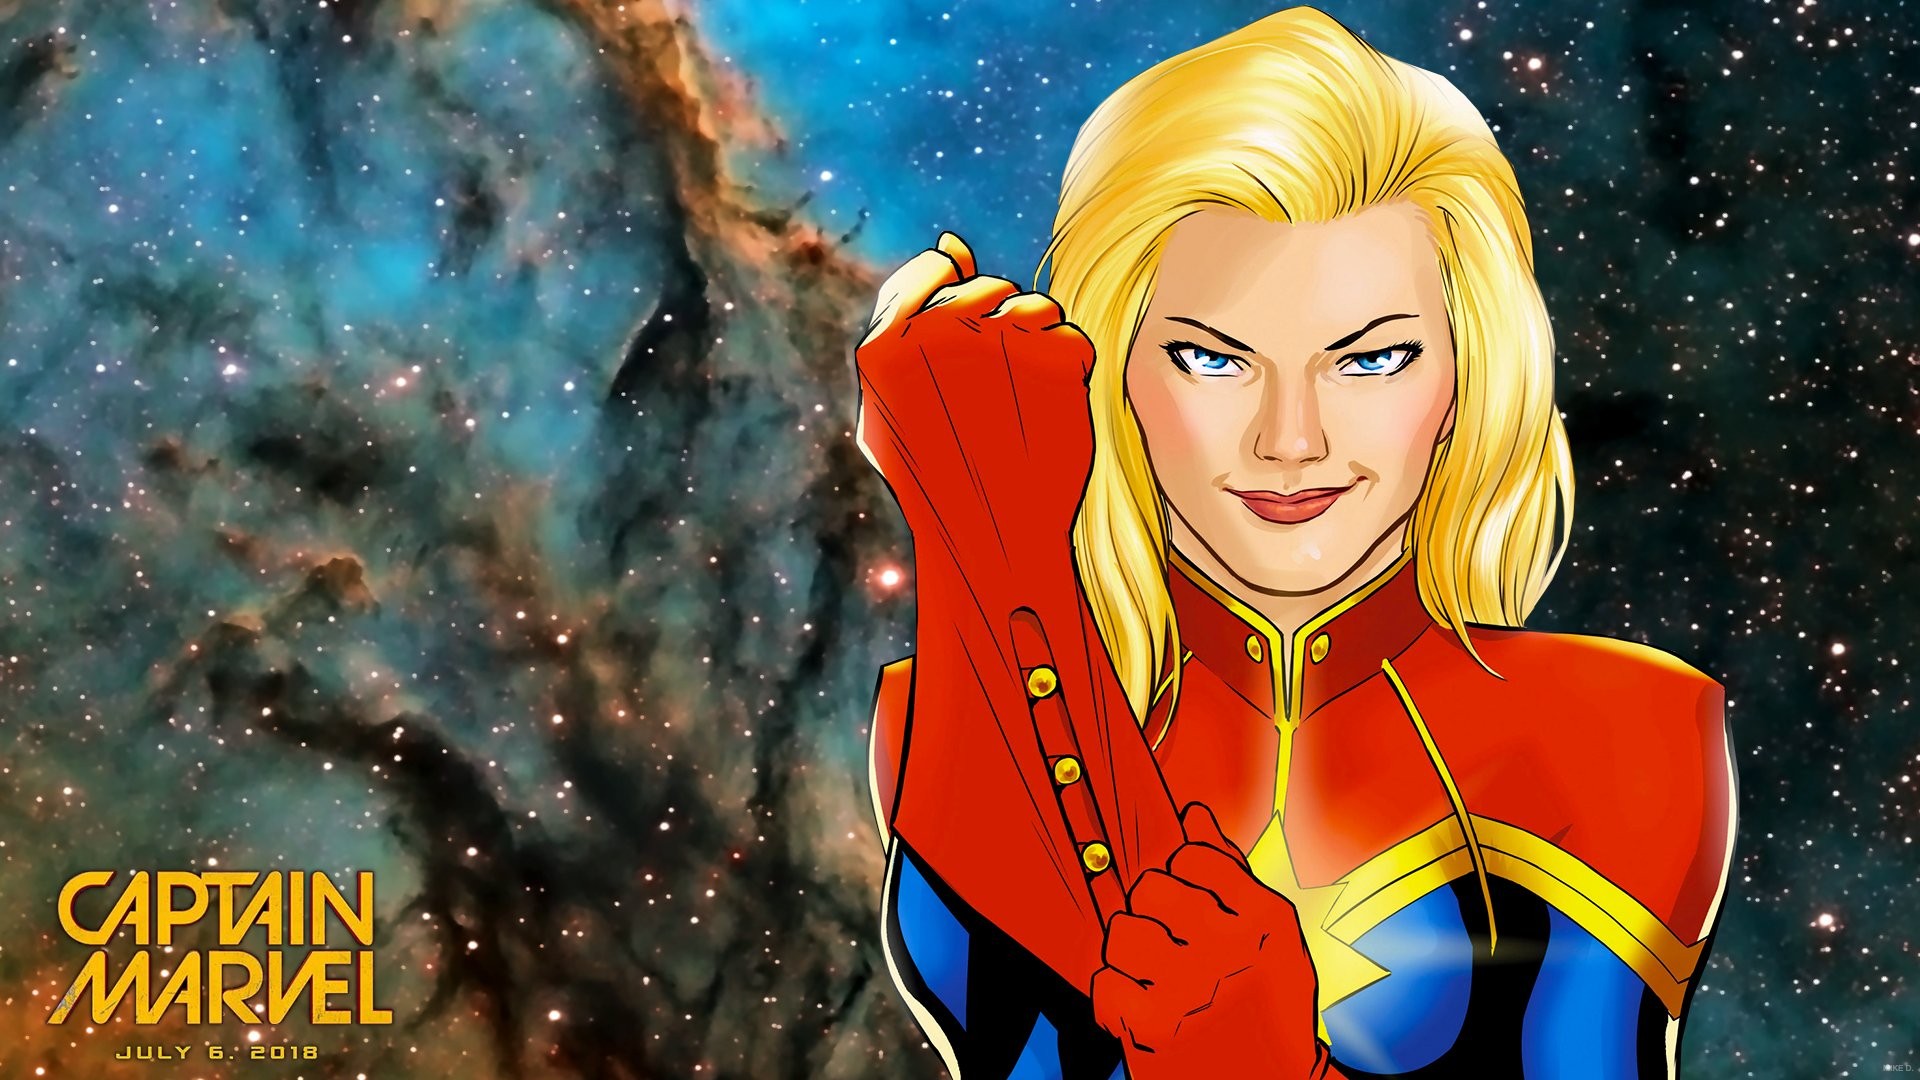 Wallpapers Computer Captain Marvel Animated With high-resolution 1920X1080 pixel. You can use this wallpaper for your Desktop Computer Backgrounds, Mac Wallpapers, Android Lock screen or iPhone Screensavers and another smartphone device